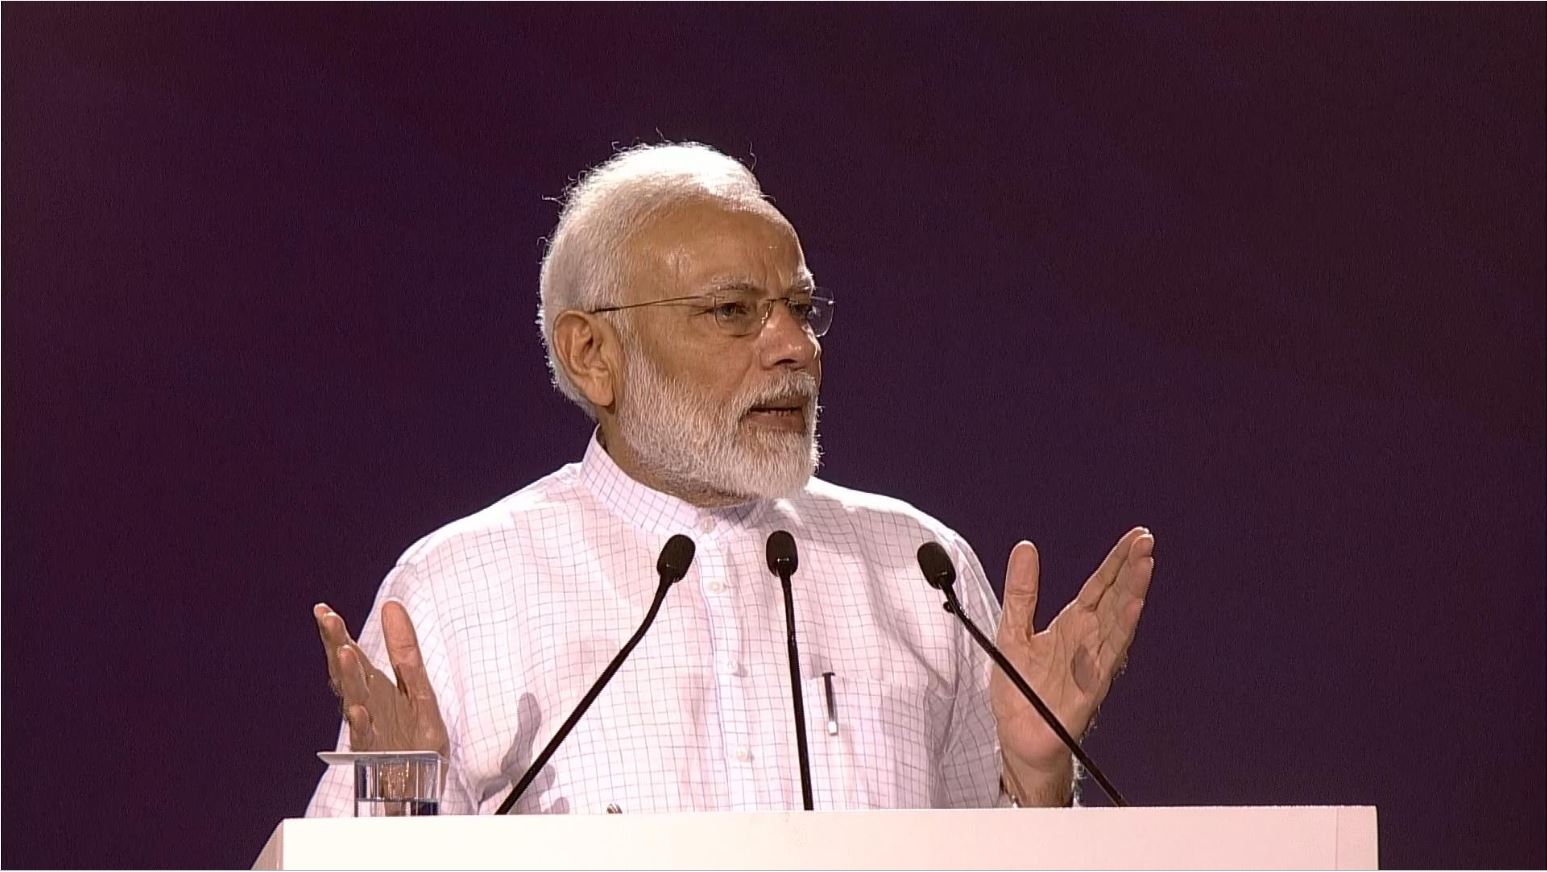 Fitness and success are interconnected, says PM at launch of Fit India Movement